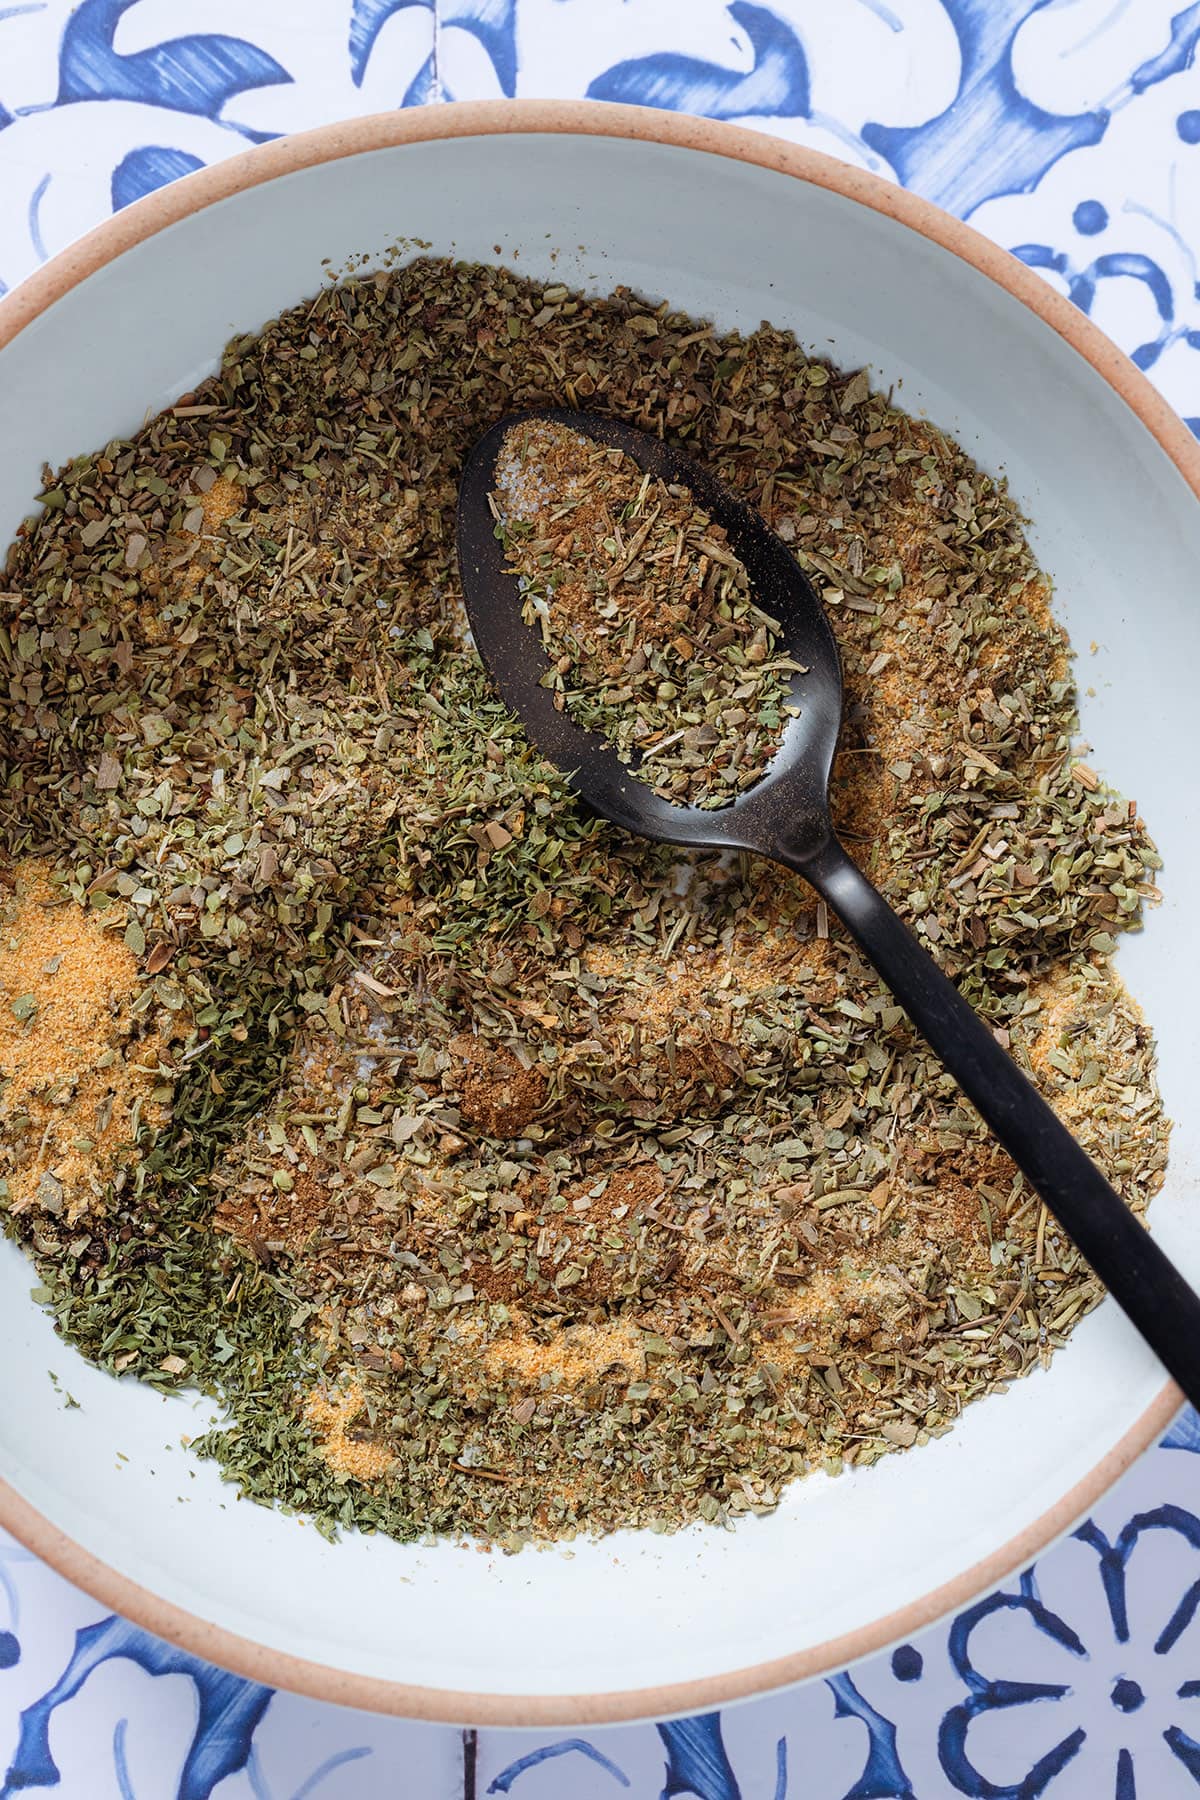 Dried herbs and spices in a white bow partially mixed with a black spoon.